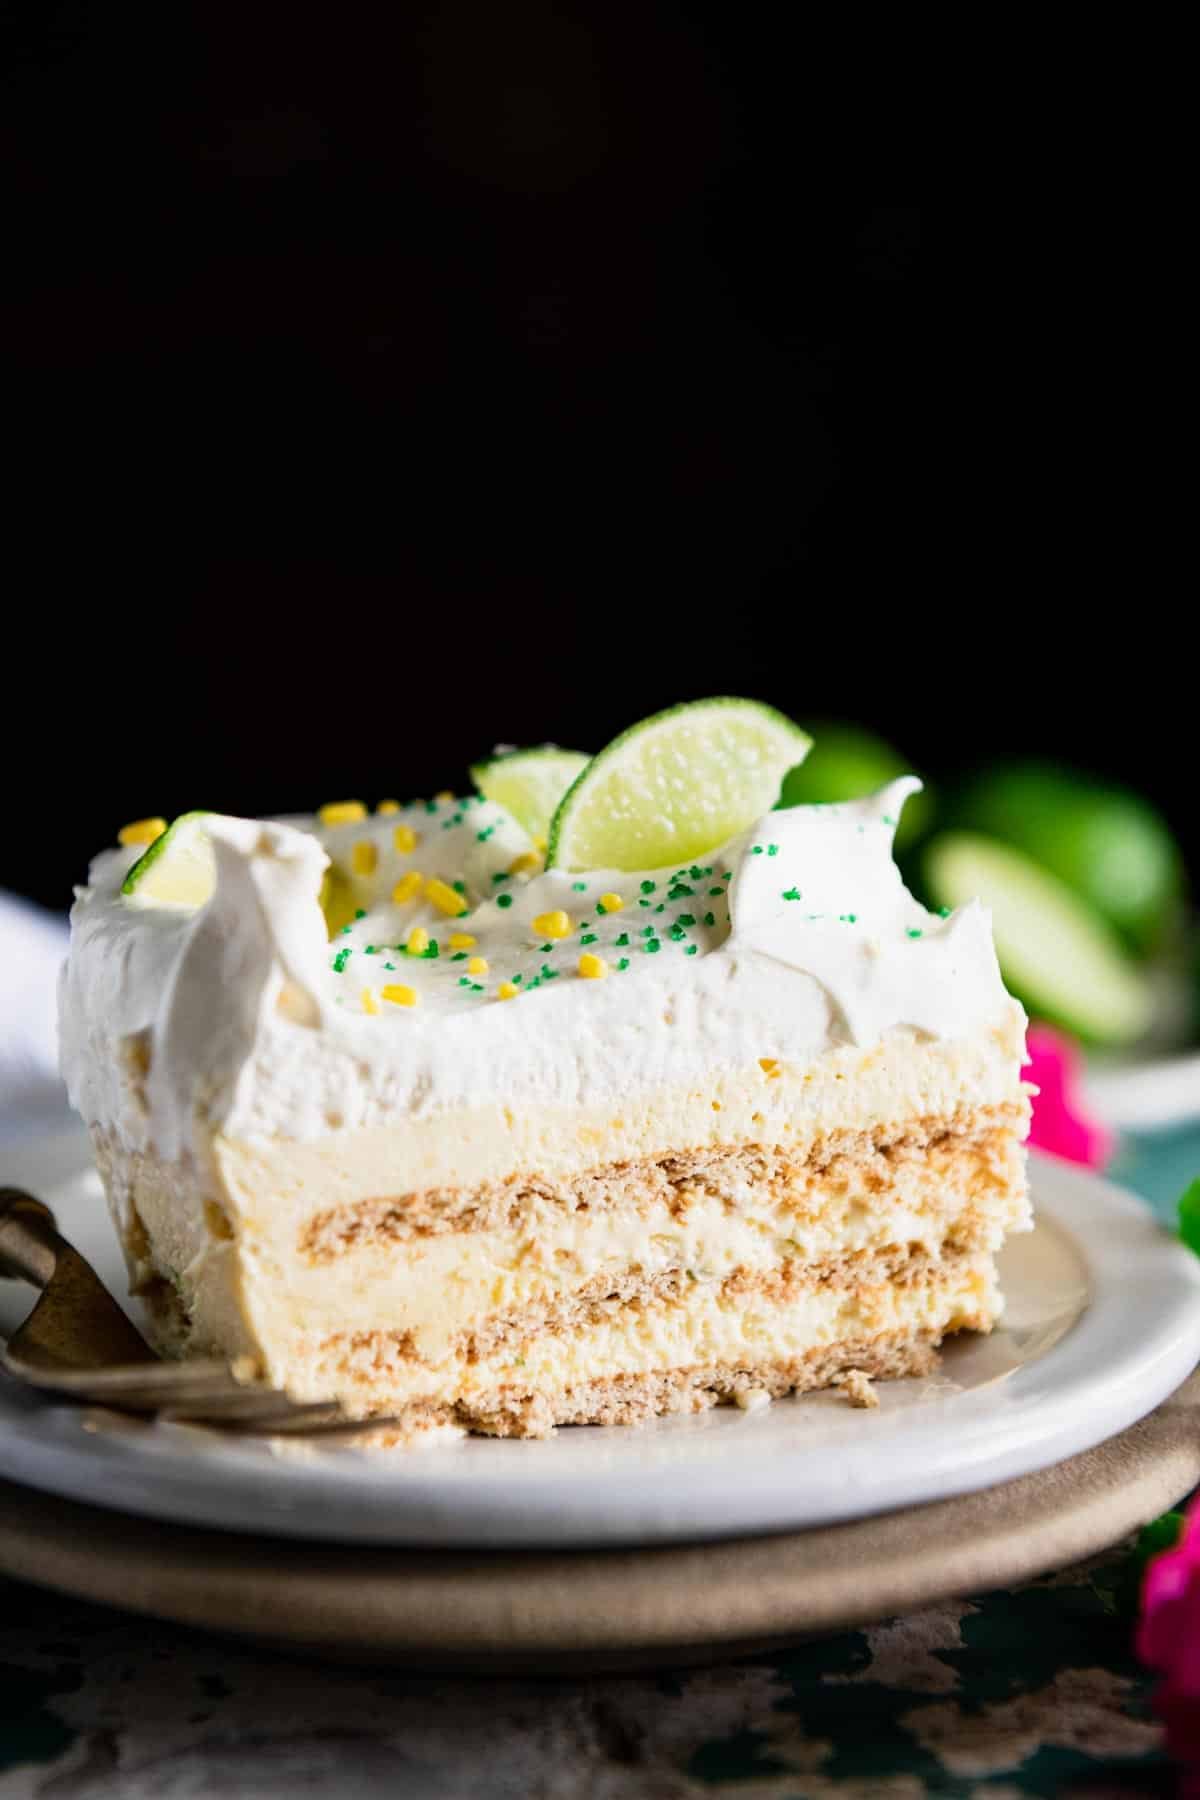 Close up side shot of a slice of key lime icebox cake in front of a black background.